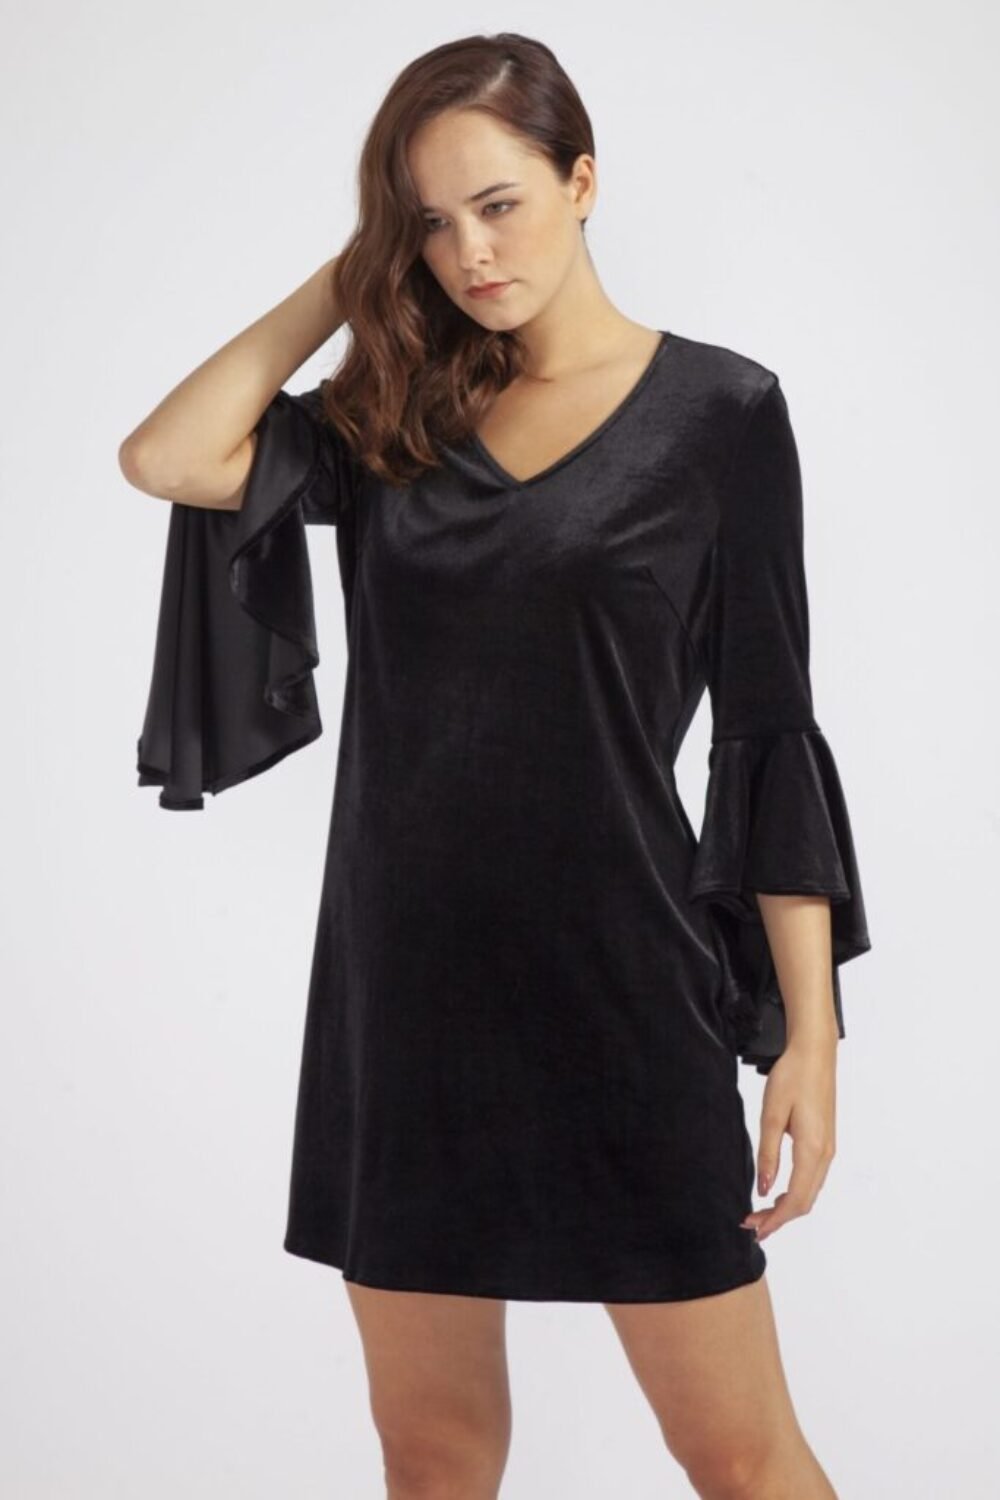 Shop Lux Black Velvet Dress and women's luxury and designer clothes at www.lux-apparel.co.uk